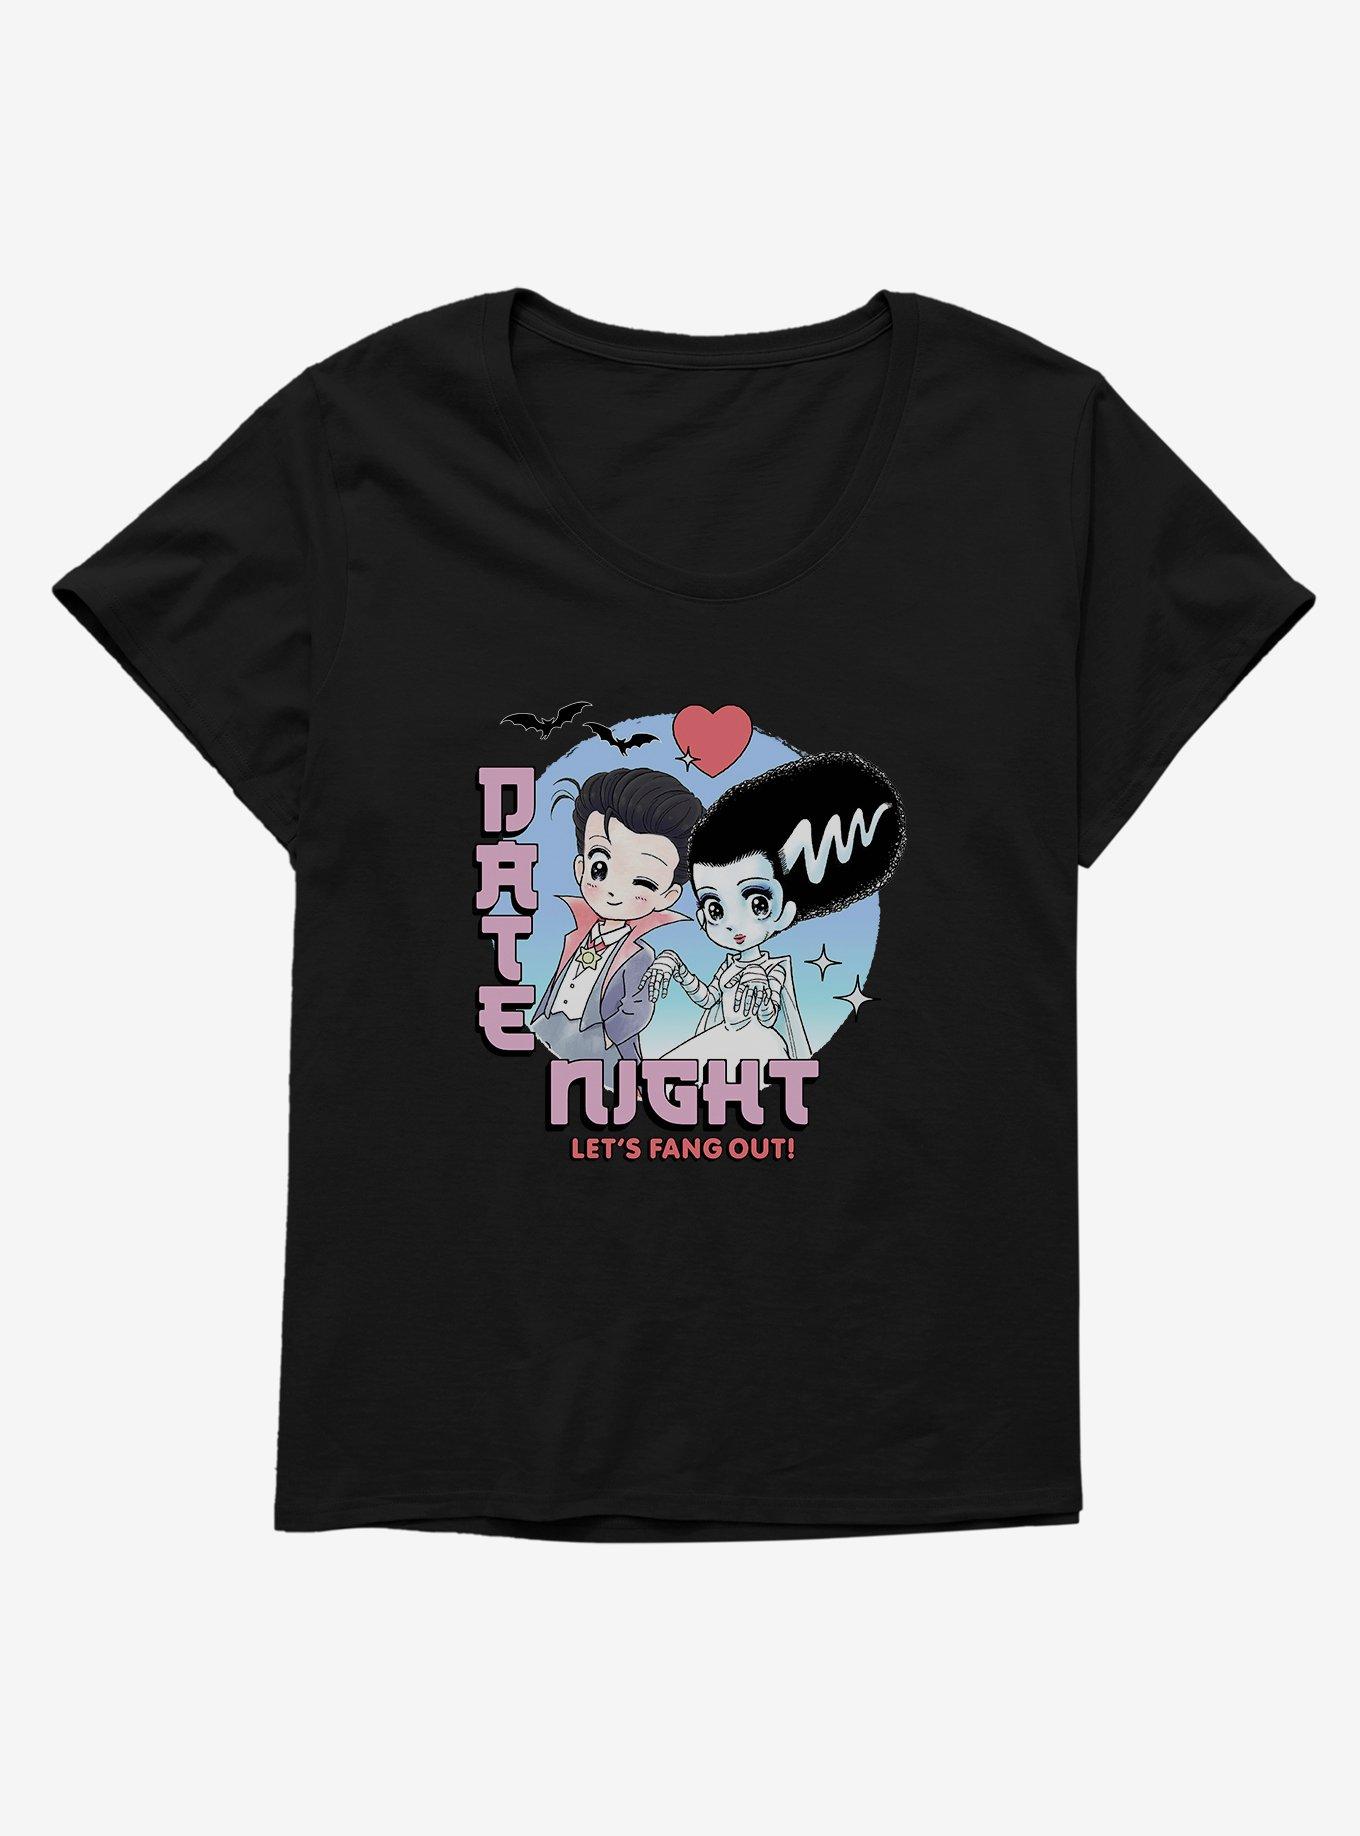 Universal Monsters Date Night Fang Out Girls T-Shirt Plus Size, BLACK, hi-res